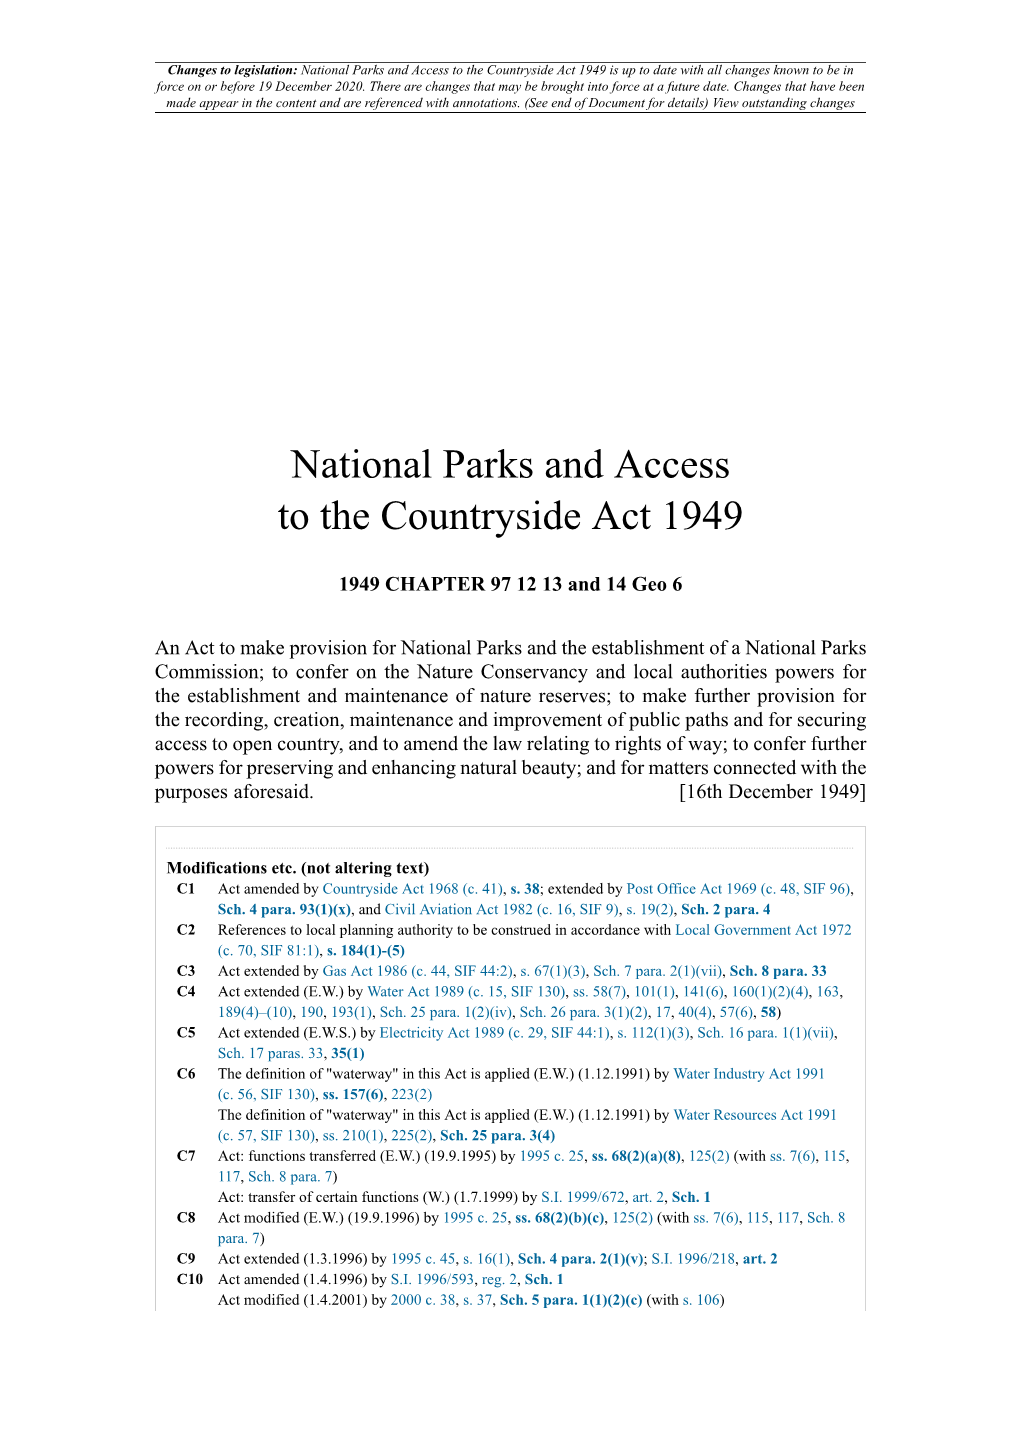 National Parks and Access to the Countryside Act 1949 Is up to Date with All Changes Known to Be in Force on Or Before 19 December 2020